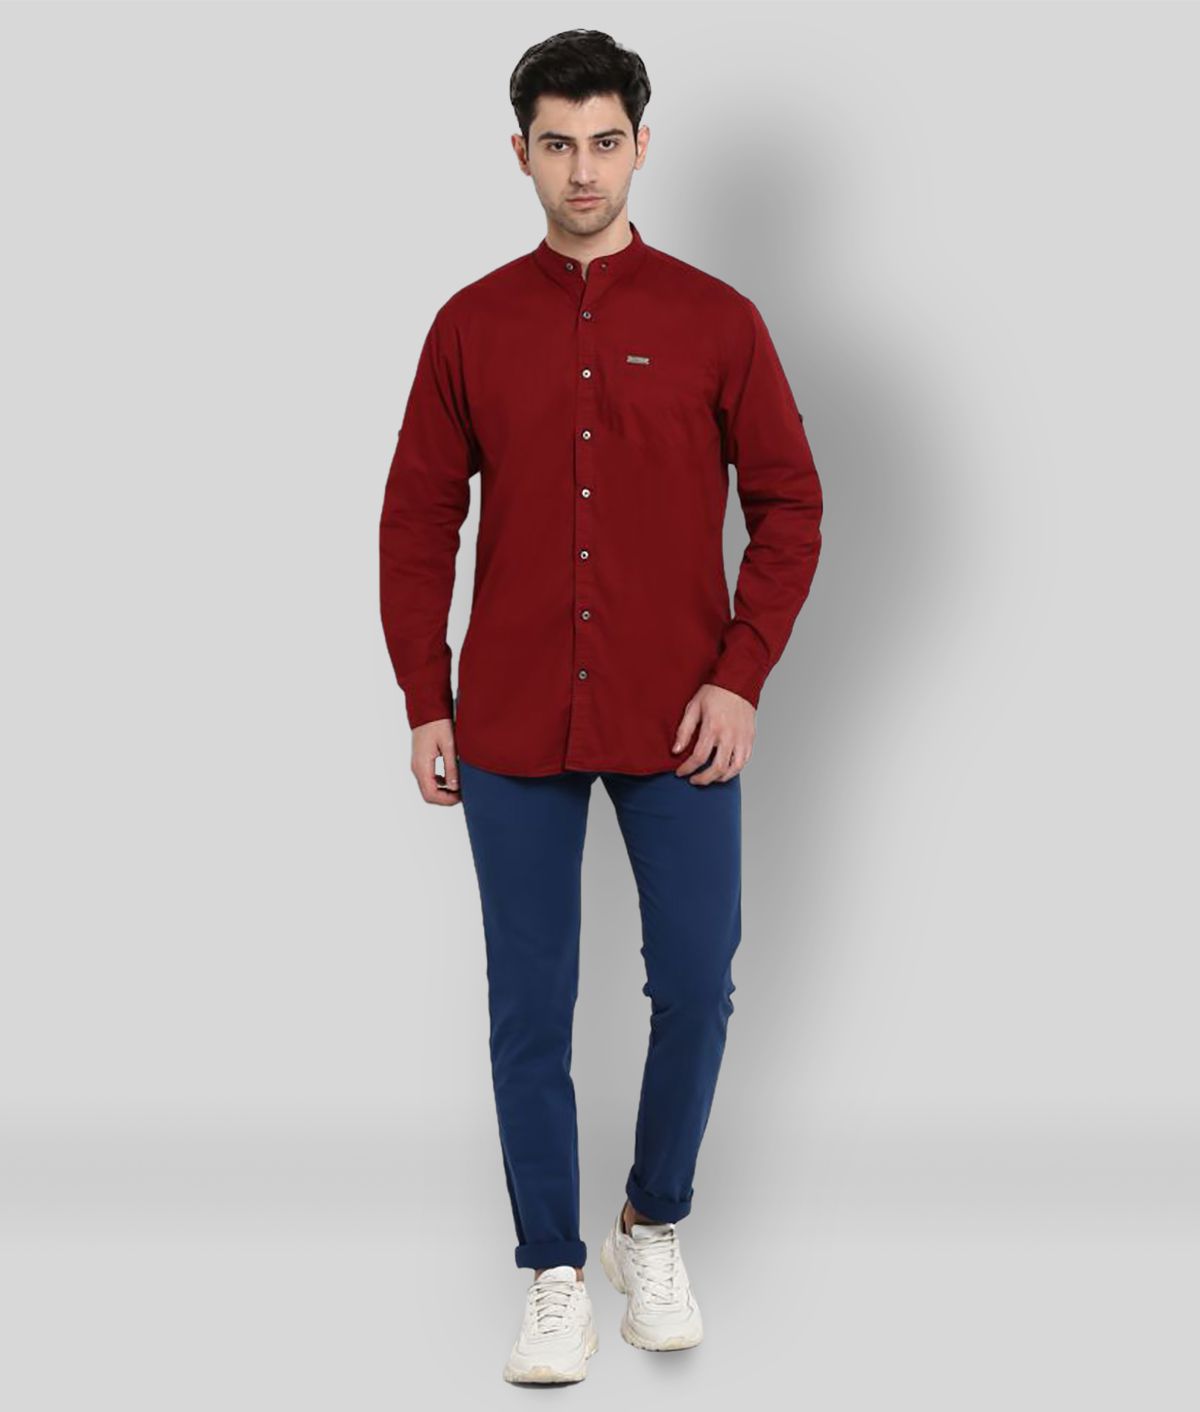     			Urbano Fashion - Red Cotton Slim Fit Men's Casual Shirt ( Pack of 1 )